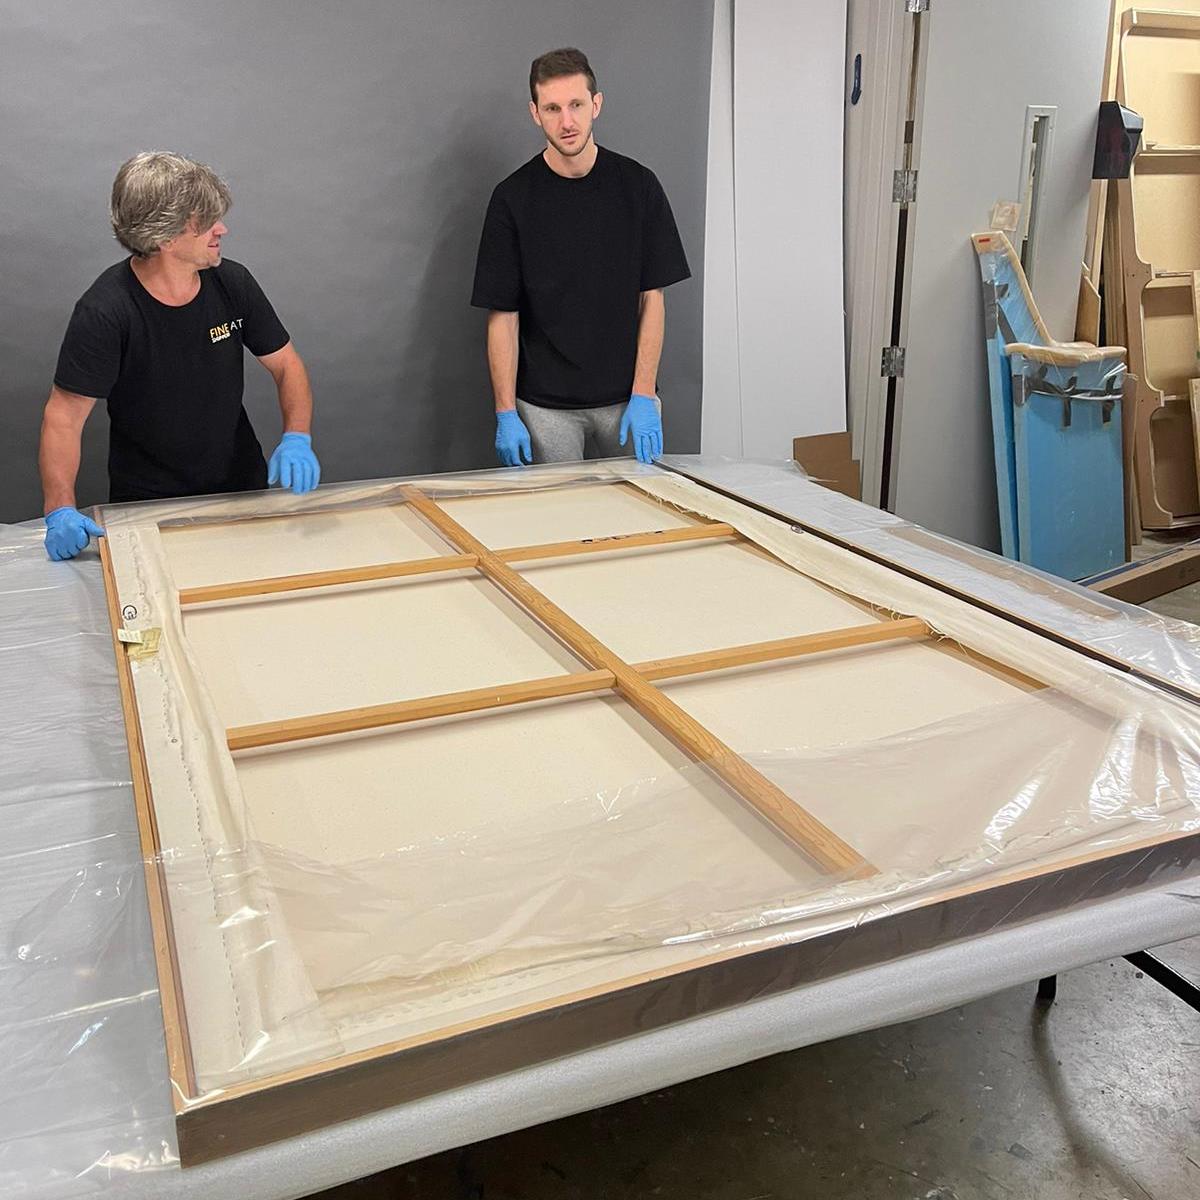 How to Move an Oversized Painting